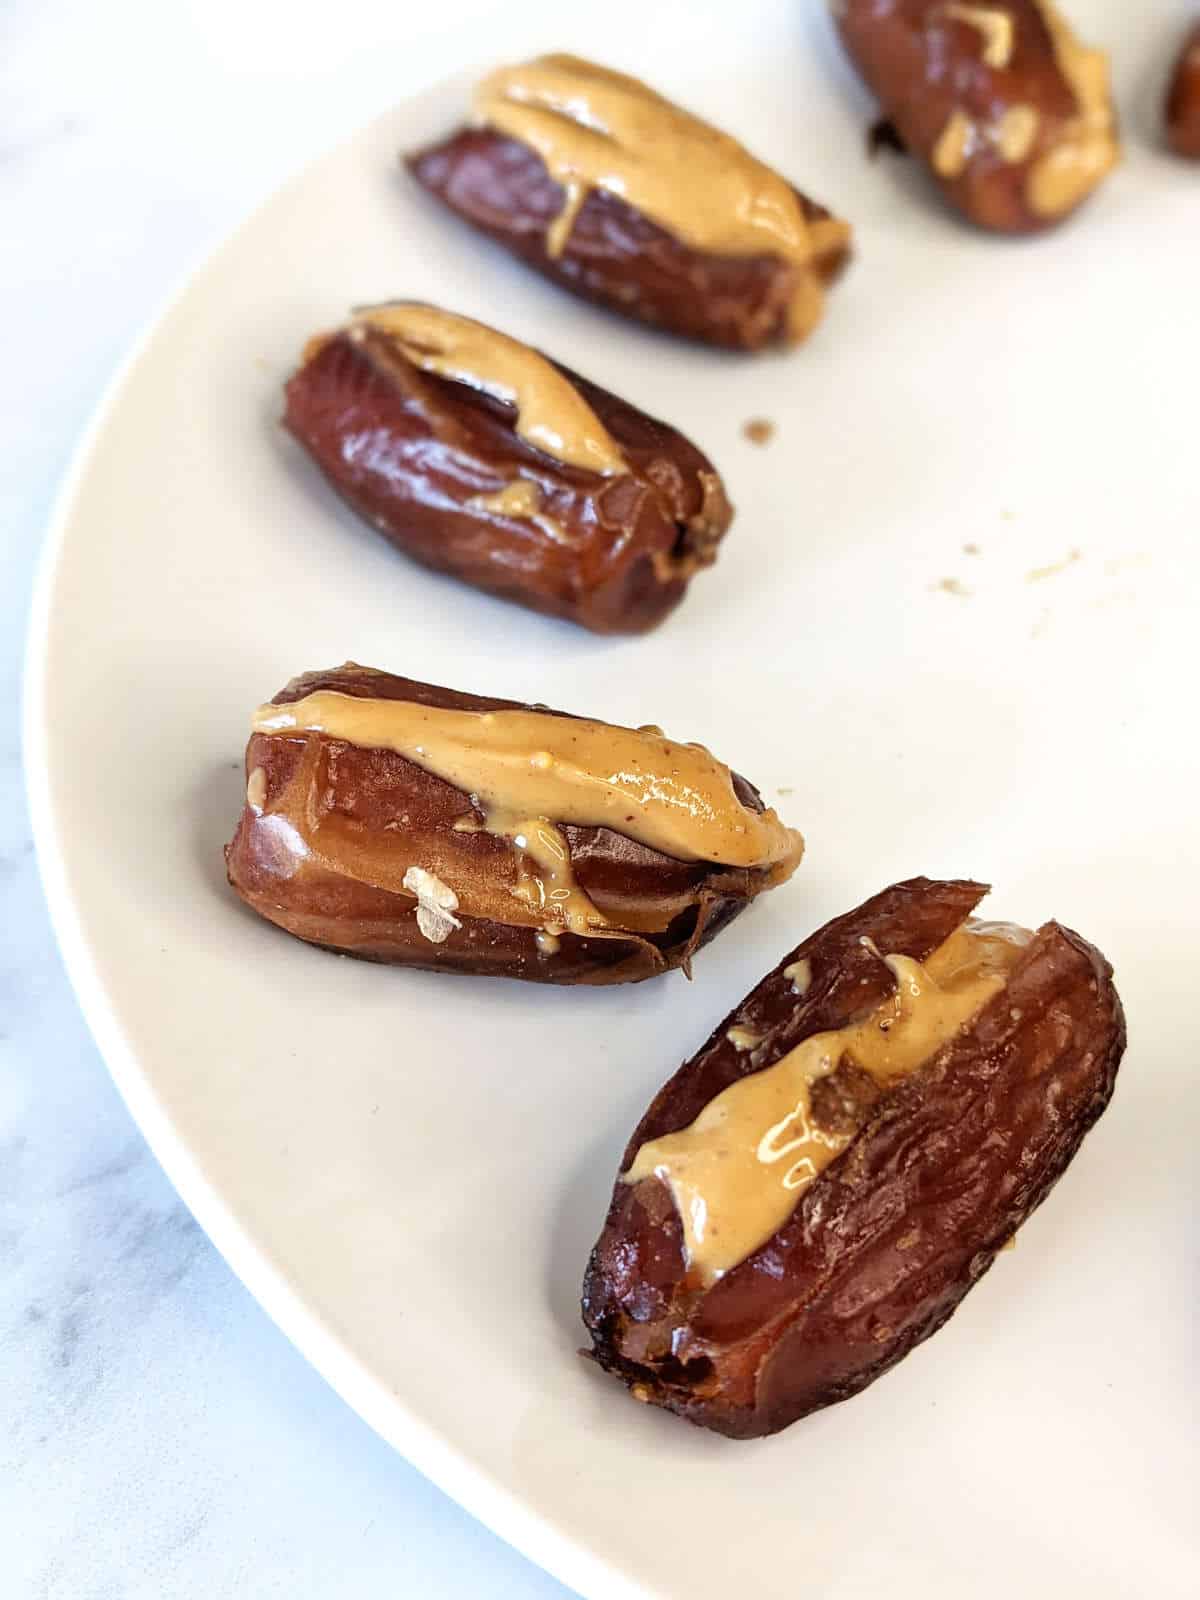 Dates stuffed with peanut butter on a plate.